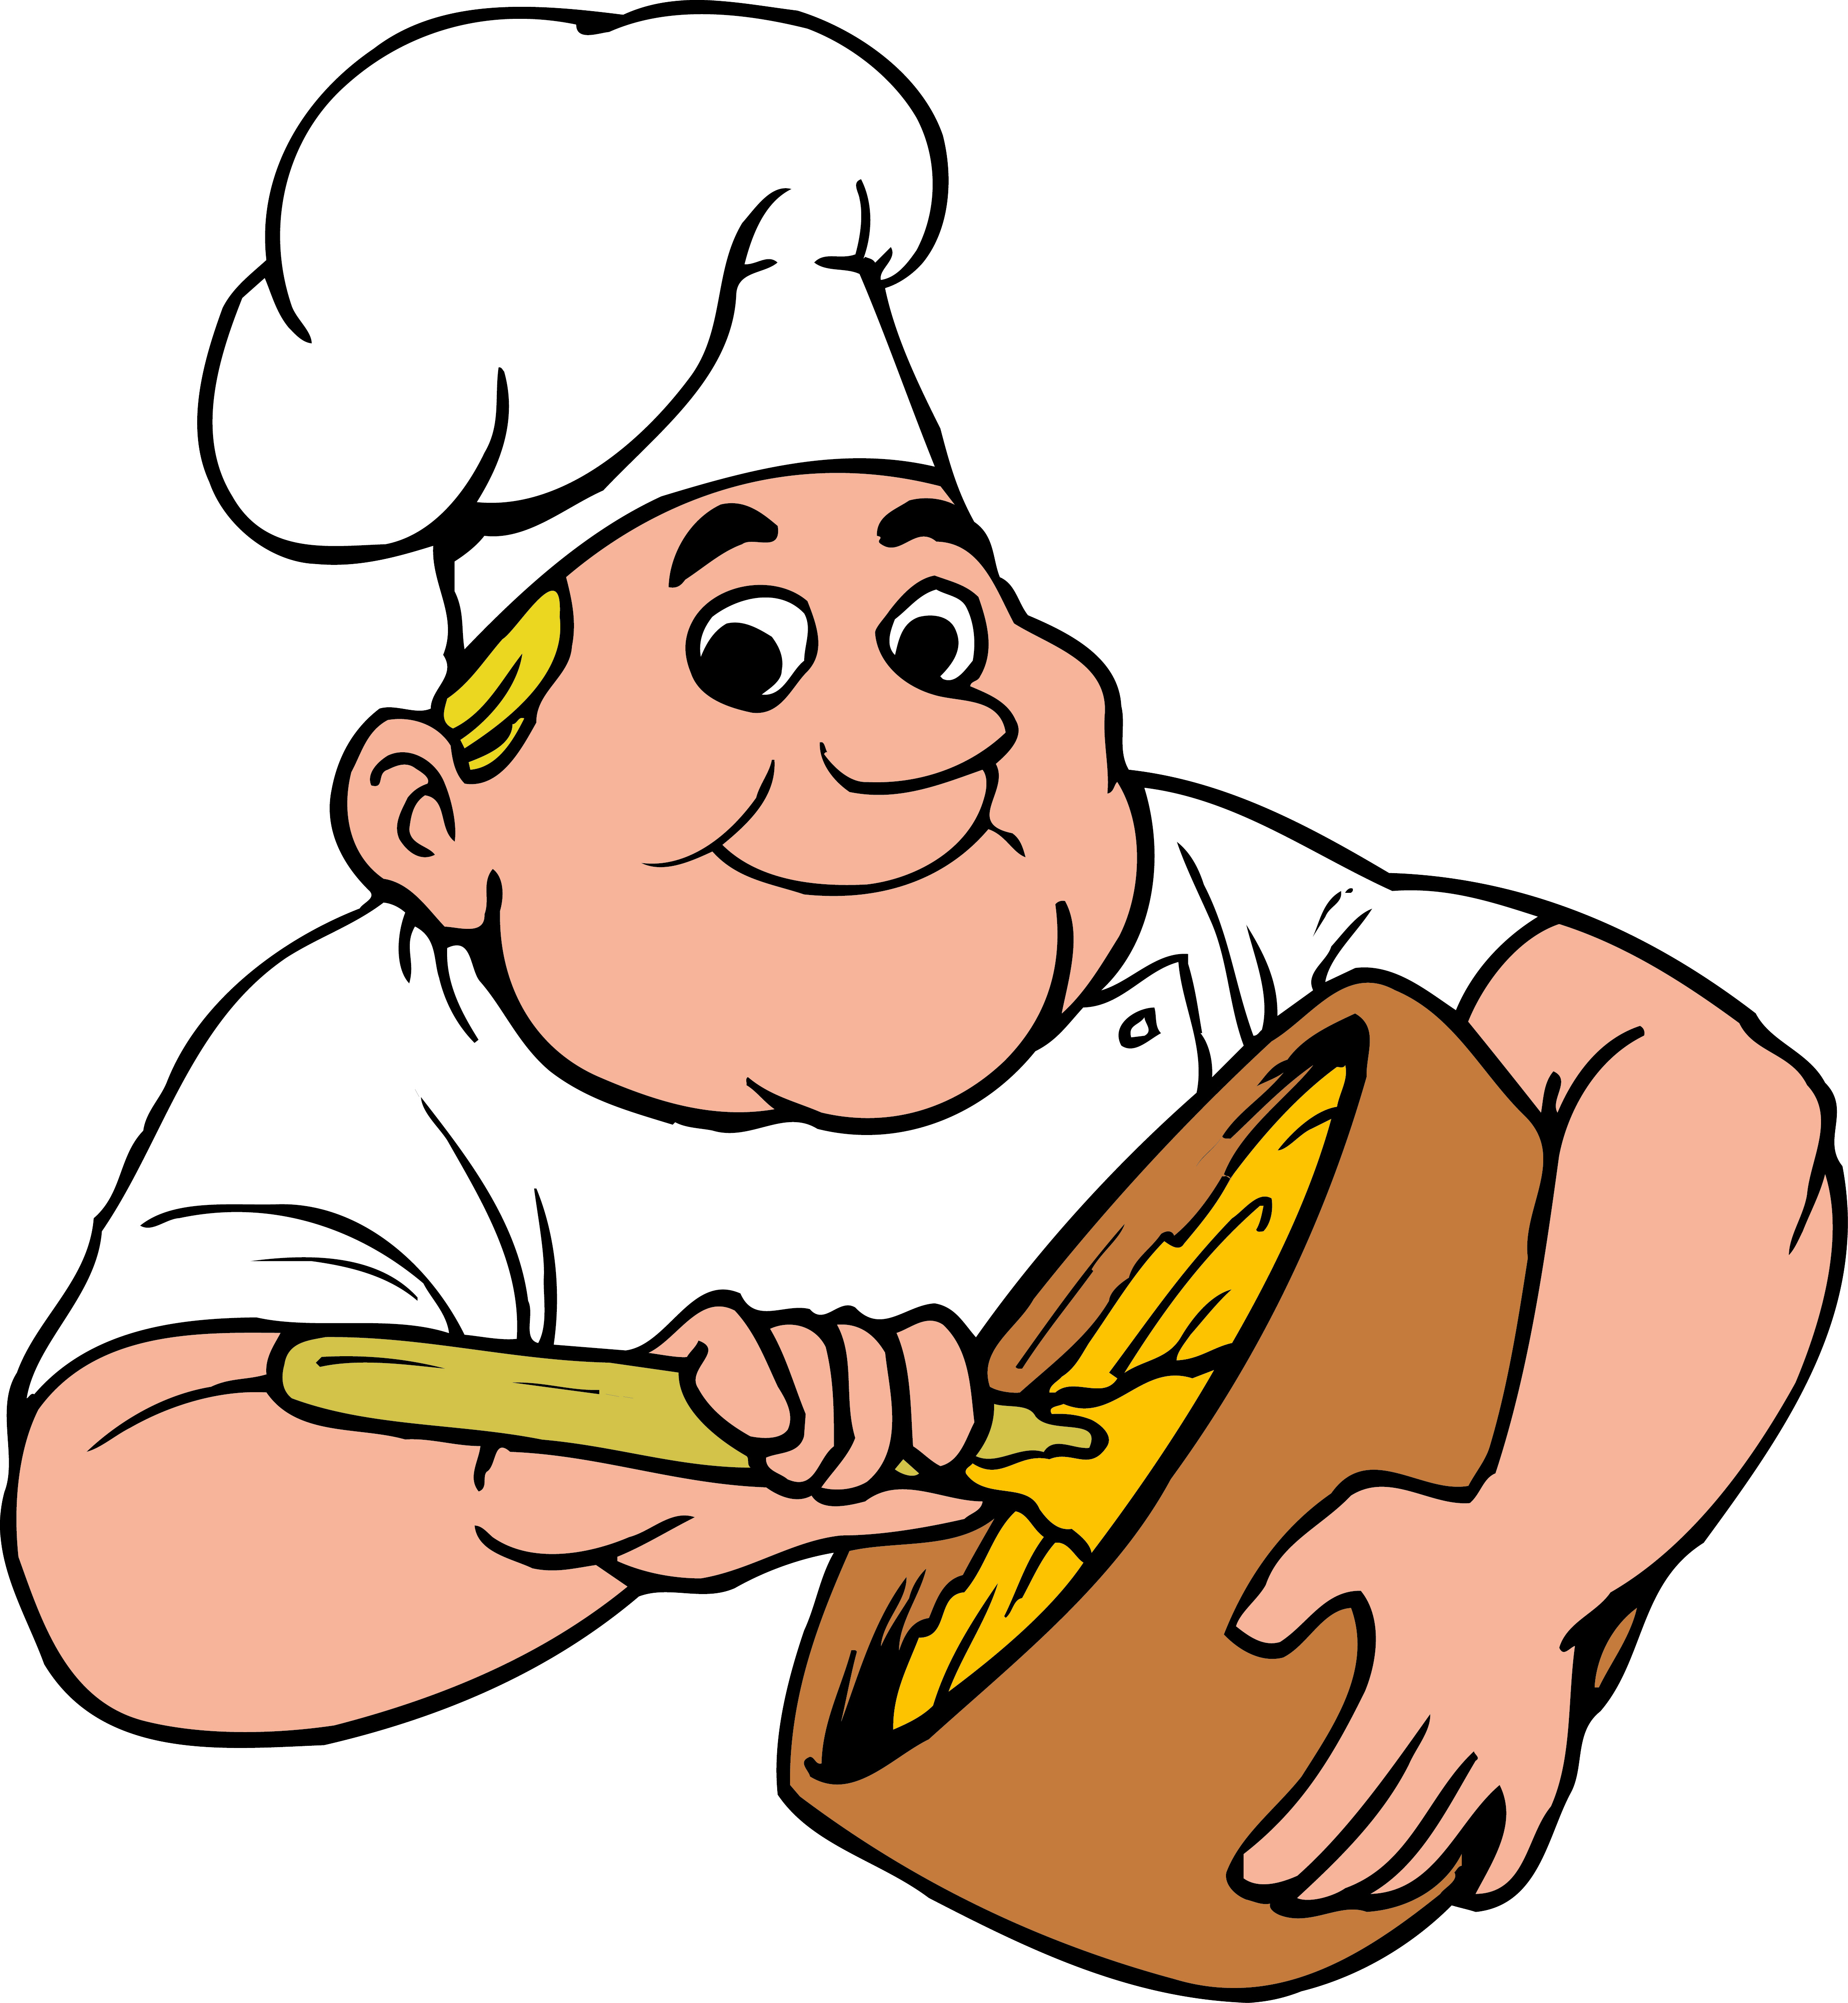 Download and share clipart about Coloring Book Cook Chef Drawing Kitchen - ...